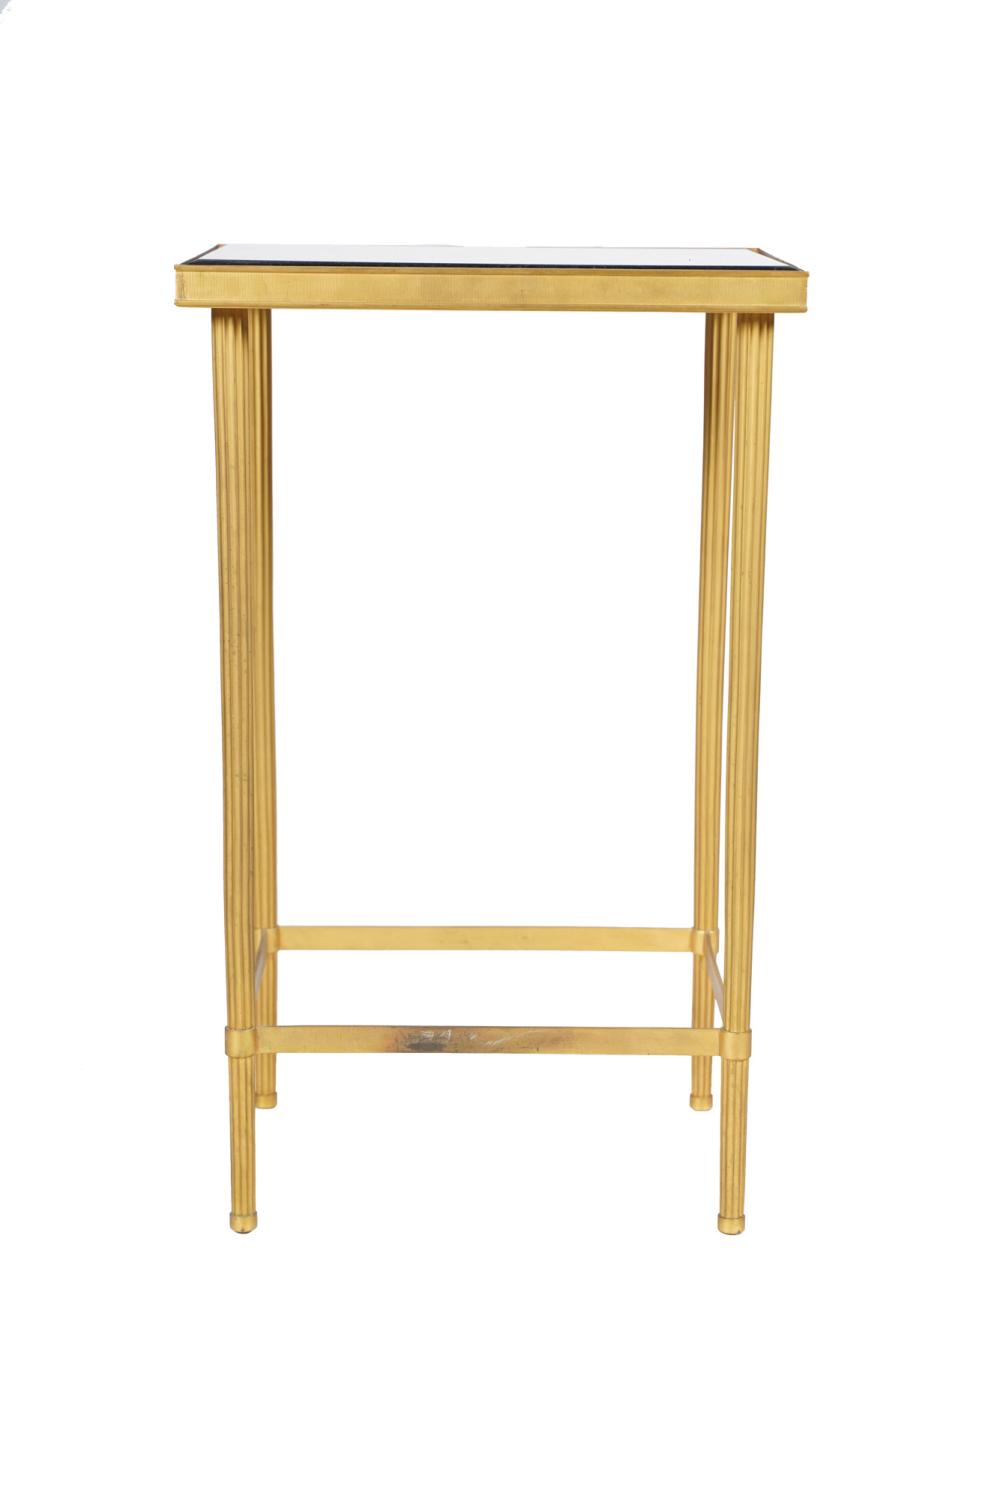 FRENCH NEOCLASSIC STYLE GILT BRONZE 336165